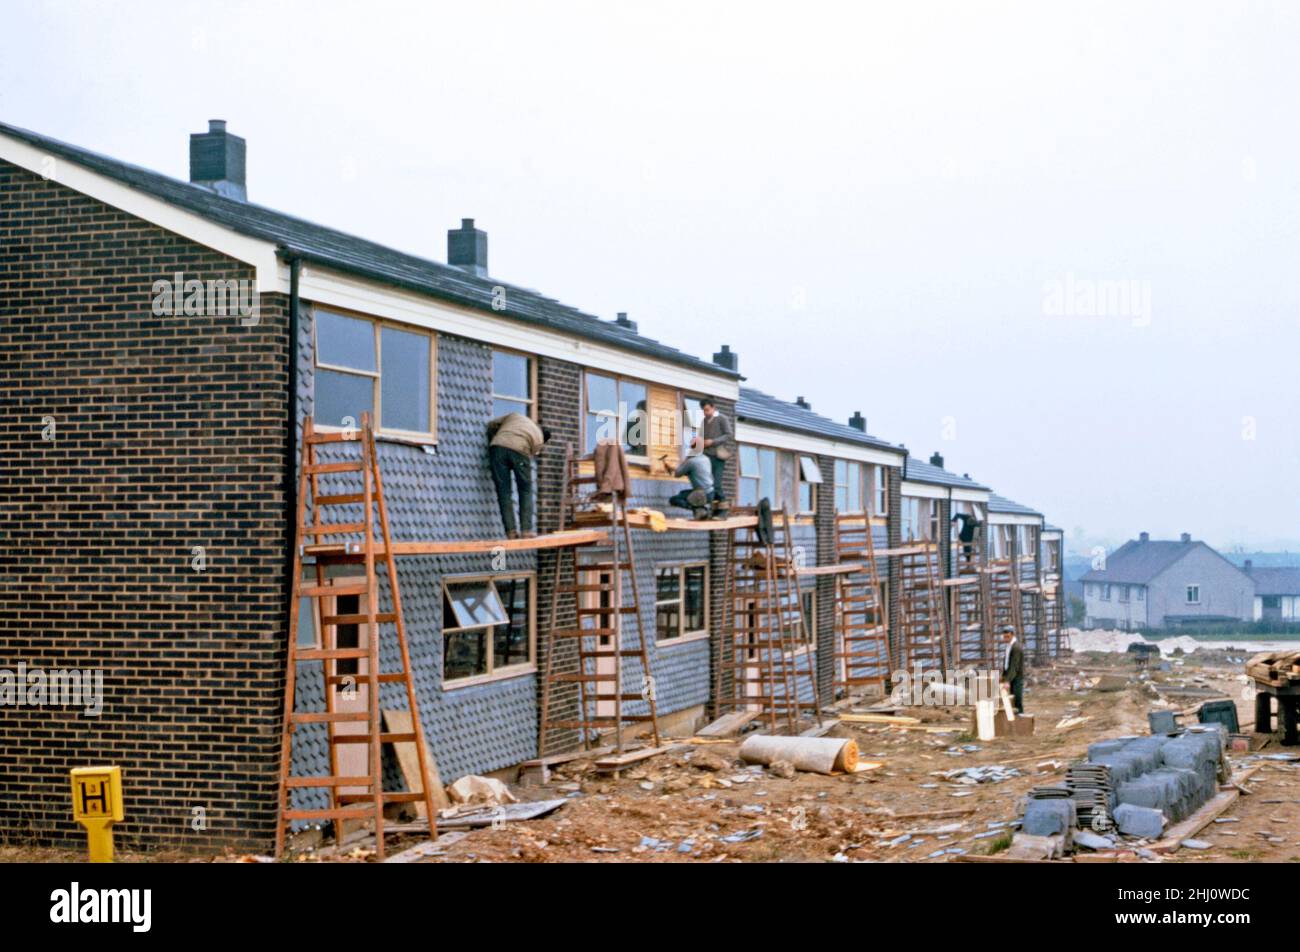 Modern house construction in Stevenage New Town, Hertfordshire, England, UK in 1963. Here, on the fronts of a terrace of houses, a hung-tile finishing layer being applied – see Alamy 2HJ0WGN for a view of the insulation and battens below the outer layer. The work seems slightly dangerous – health and safety regulations would require extensive scaffolding and hard hats being worn today. Stevenage lies about 30 miles (50 km) north of London. In 1946 Stevenage was designated the United Kingdom's first New Town under the New Towns Act – a vintage 1960s photograph. Stock Photo